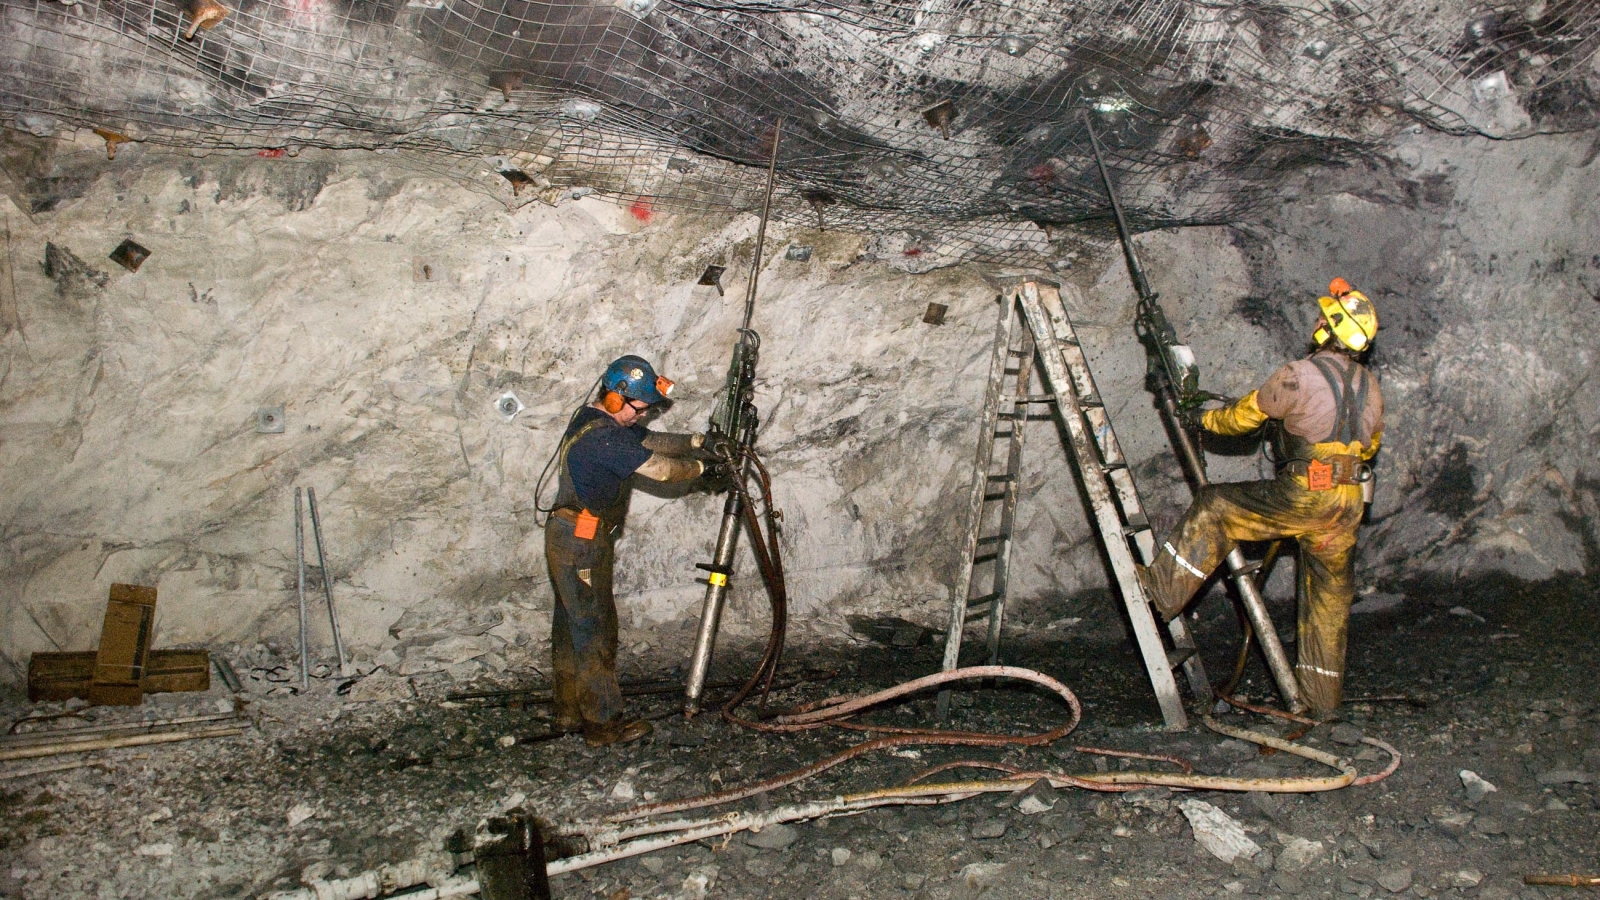 Two men use jackleg drills to install ground support in a cavern.